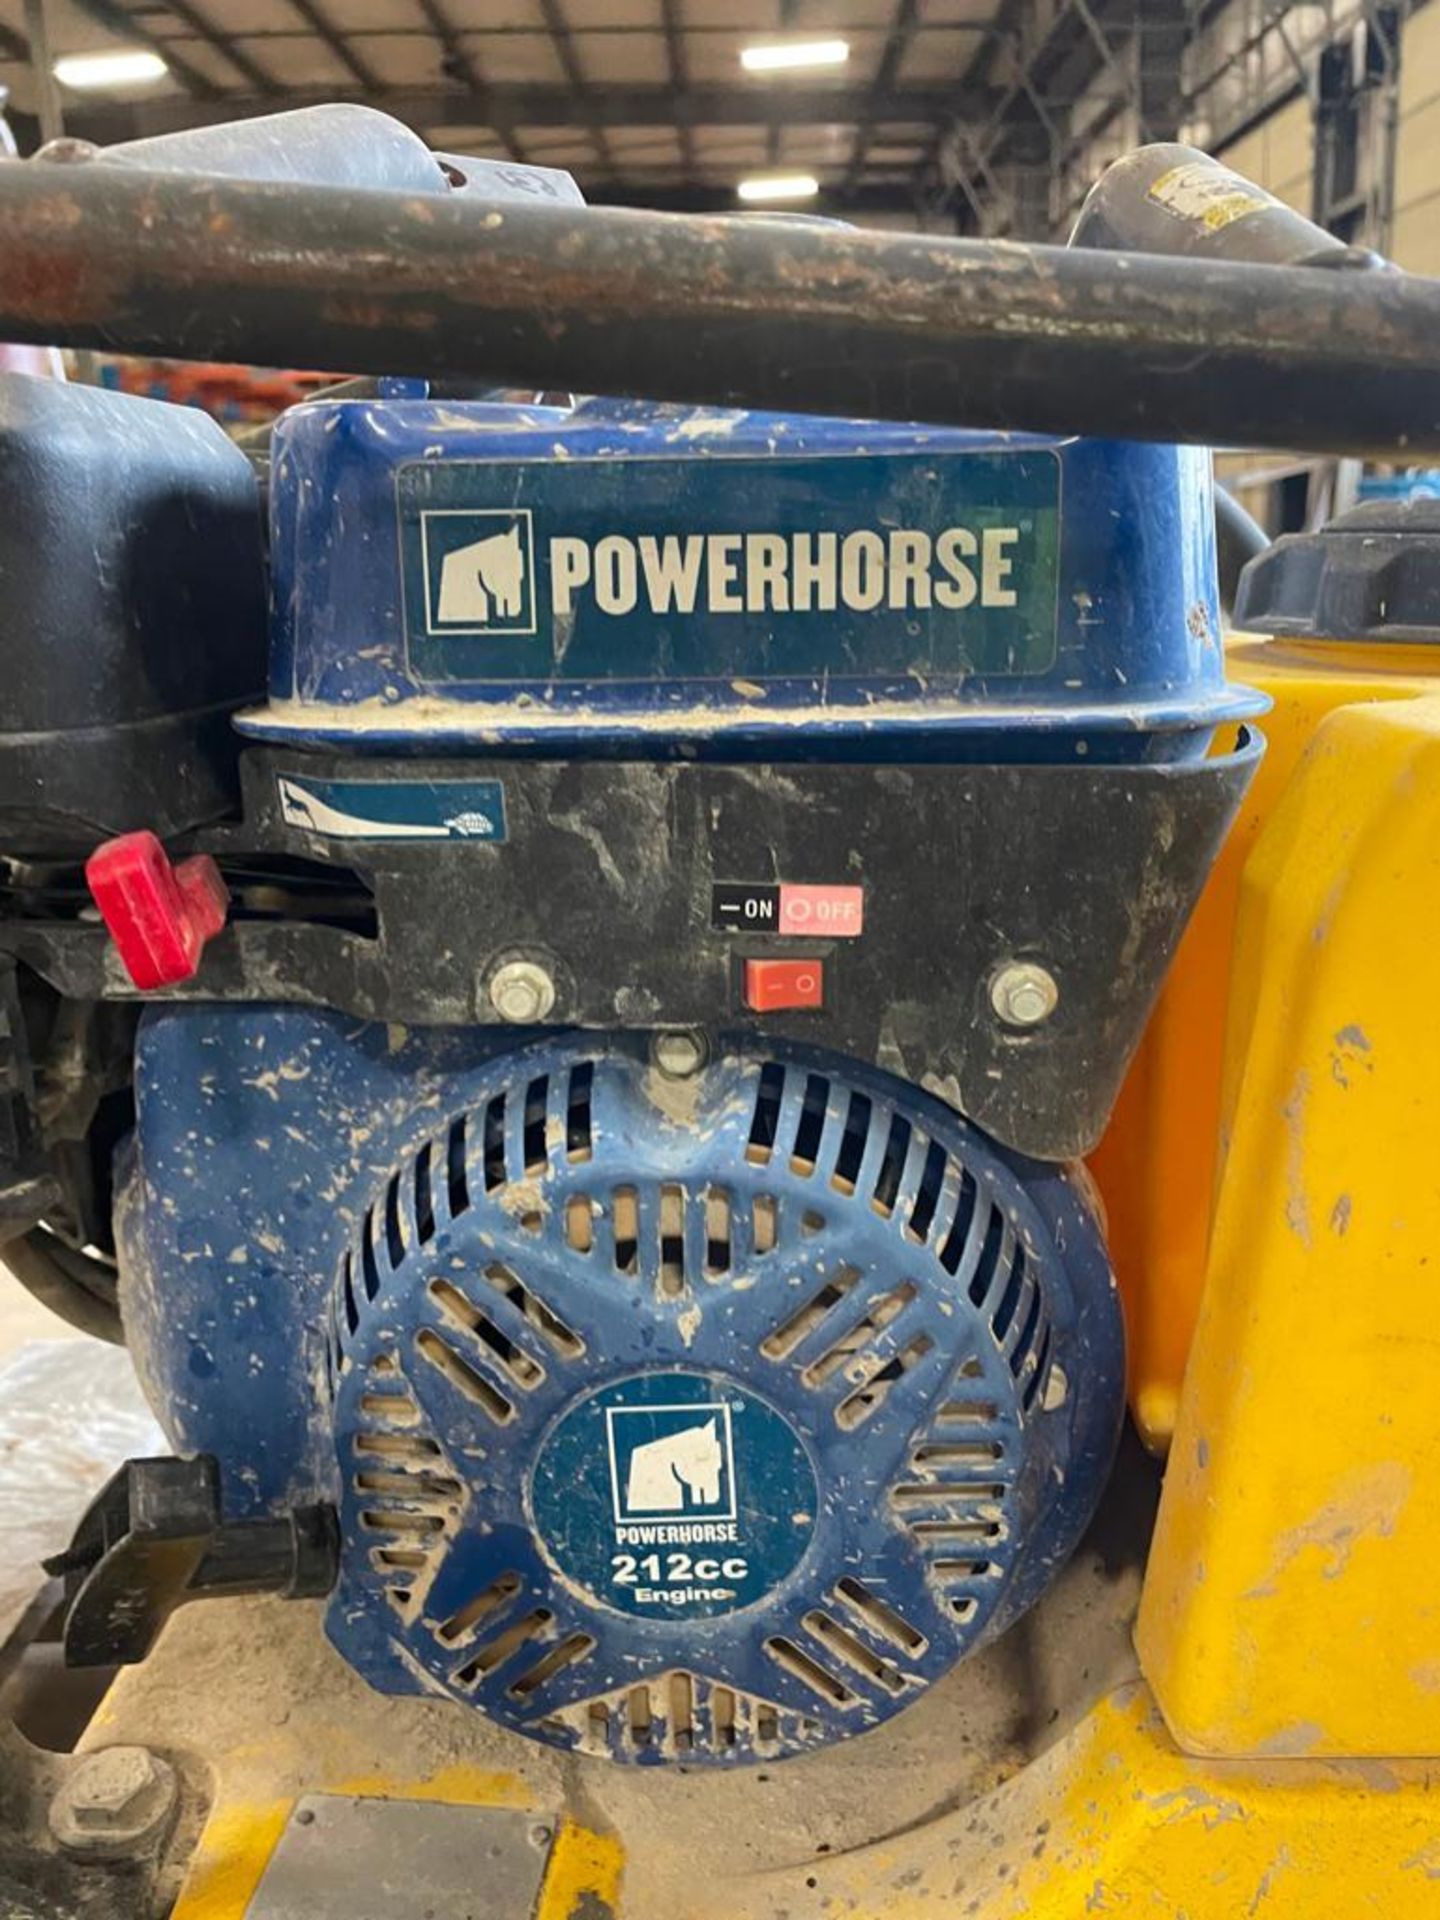 Wacker Plate Compactor with Powerhorse 212 cc Engine.  Located in Hazelwood, MO - Image 4 of 6